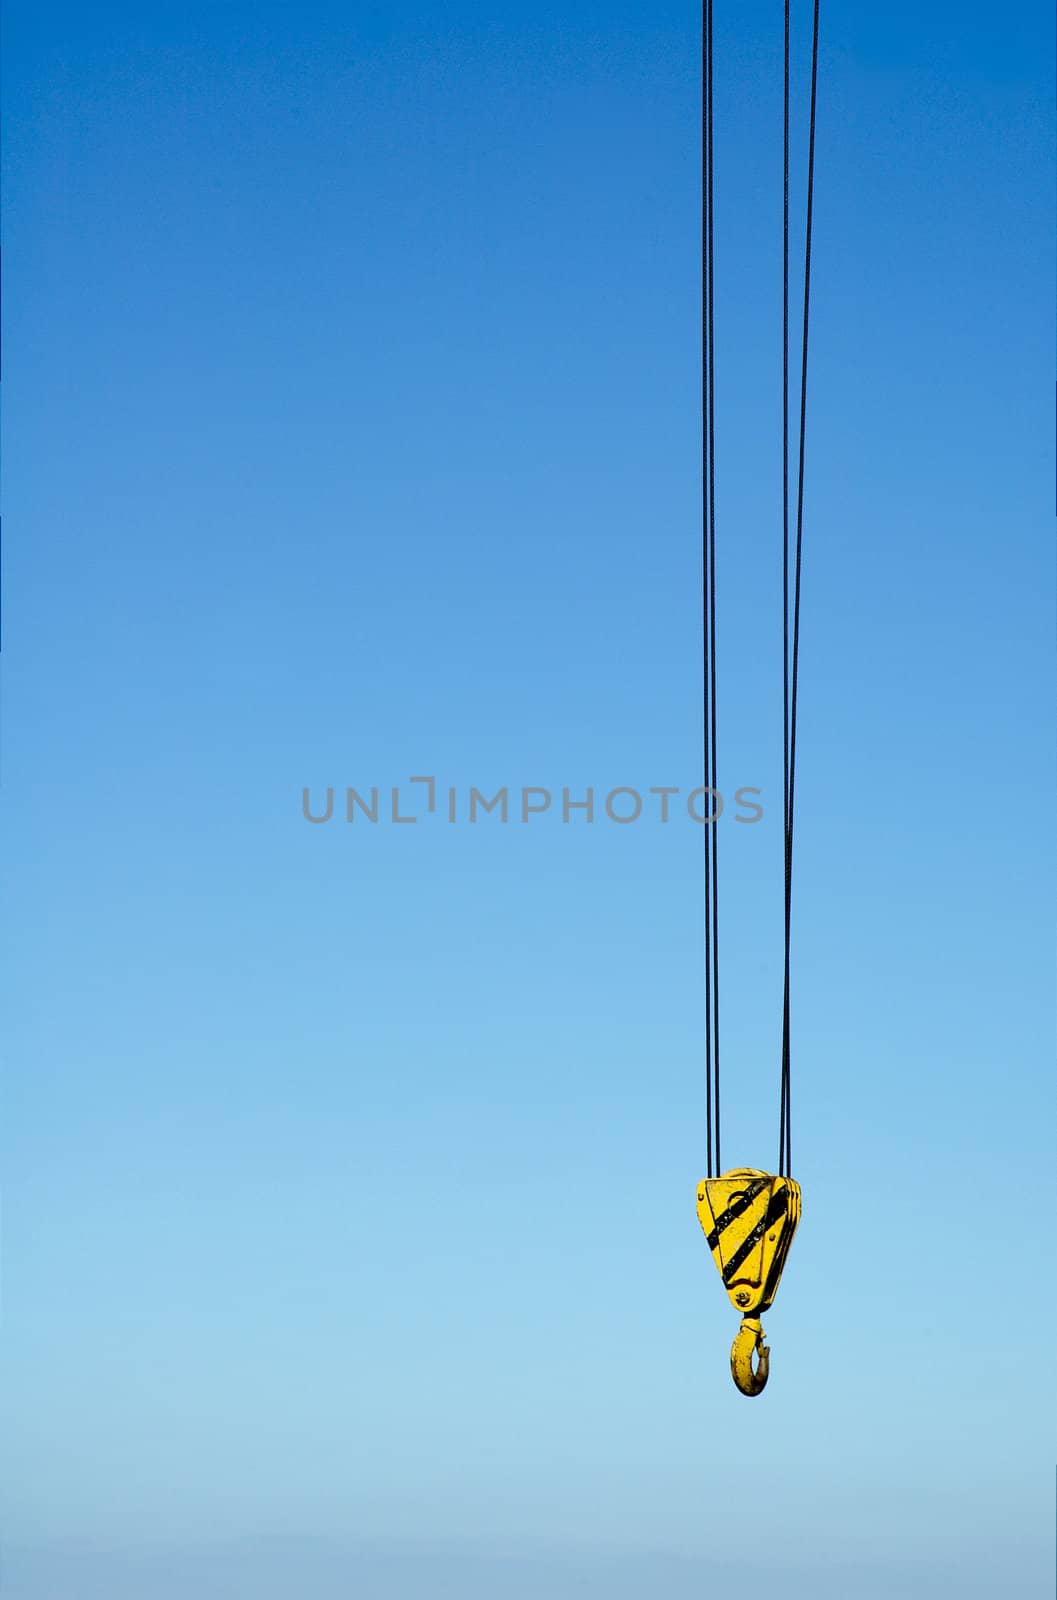 hook from crane against blue sky